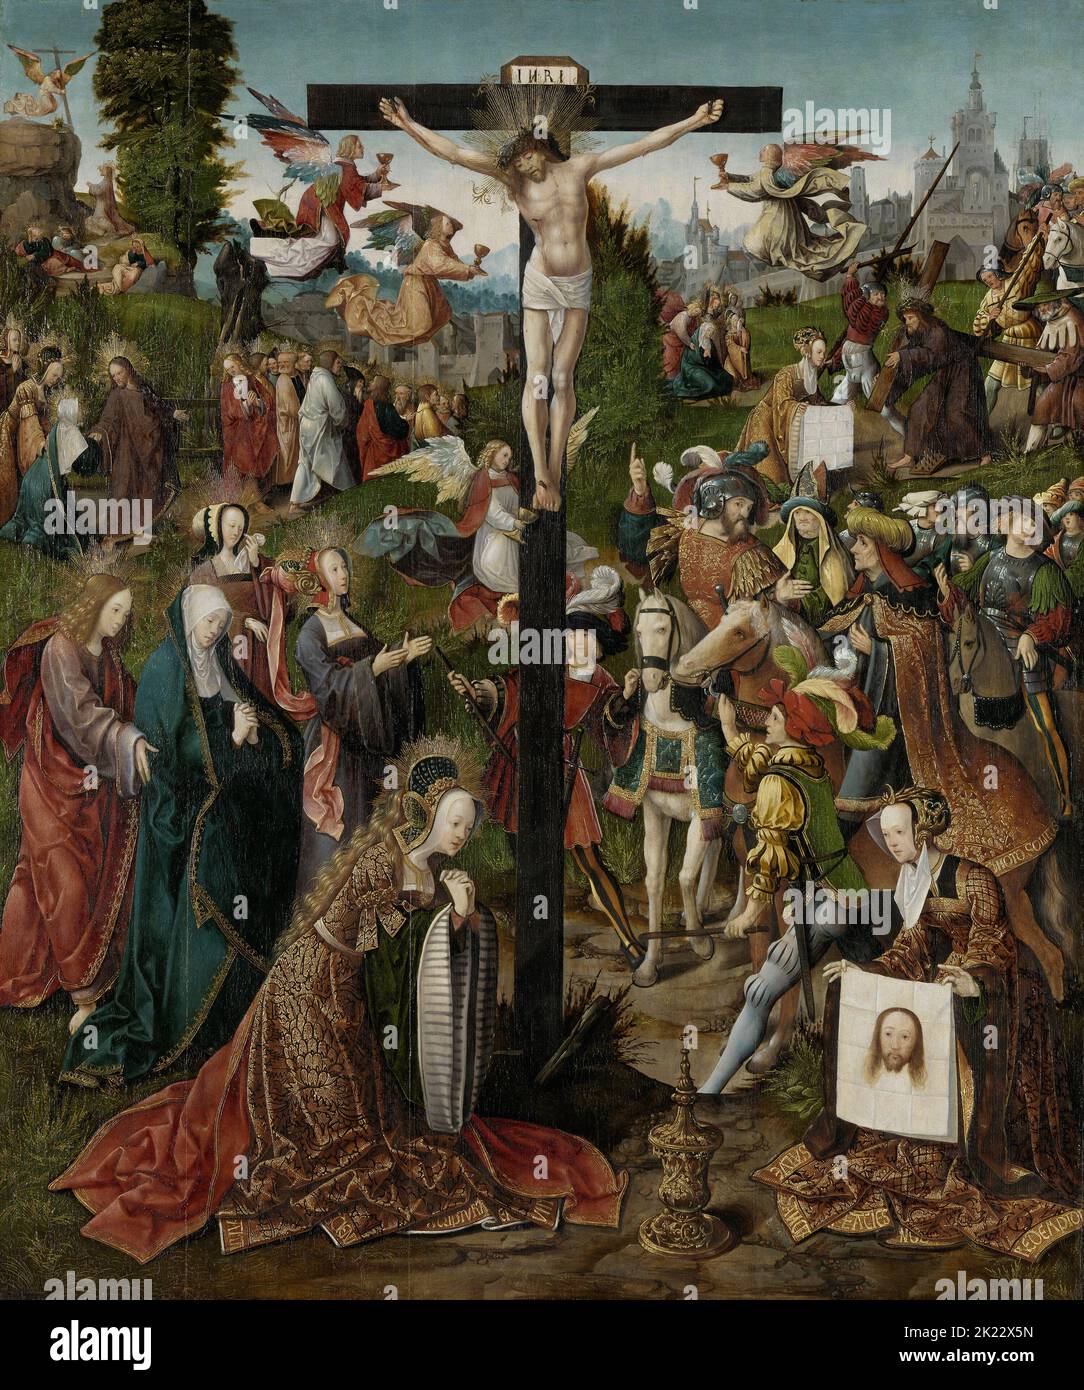 Netherlands: 'The Crucifixion'. Oil on panel painting by Jacob Cornelisz van Oostsanen (c. 1472/1477-1533), c. 1507-1510.  In this famous scene from the New Testament of the Christian Bible, Jesus Christ is crucified. He is nailed to a cross inscribed with the initials ‘INRI’—Iesus Nazerenus, Rex Iudaeorum’, meaning ‘Jesus of Nazareth, King of the Jews’—signifying the Romans’ ridicule of Him.  Angels fly nearby, collecting Jesus’ blood in their goblets. At the foot of the cross, richly dressed and with a halo around her flowing golden hair, Mary Magdalene prays. Stock Photo